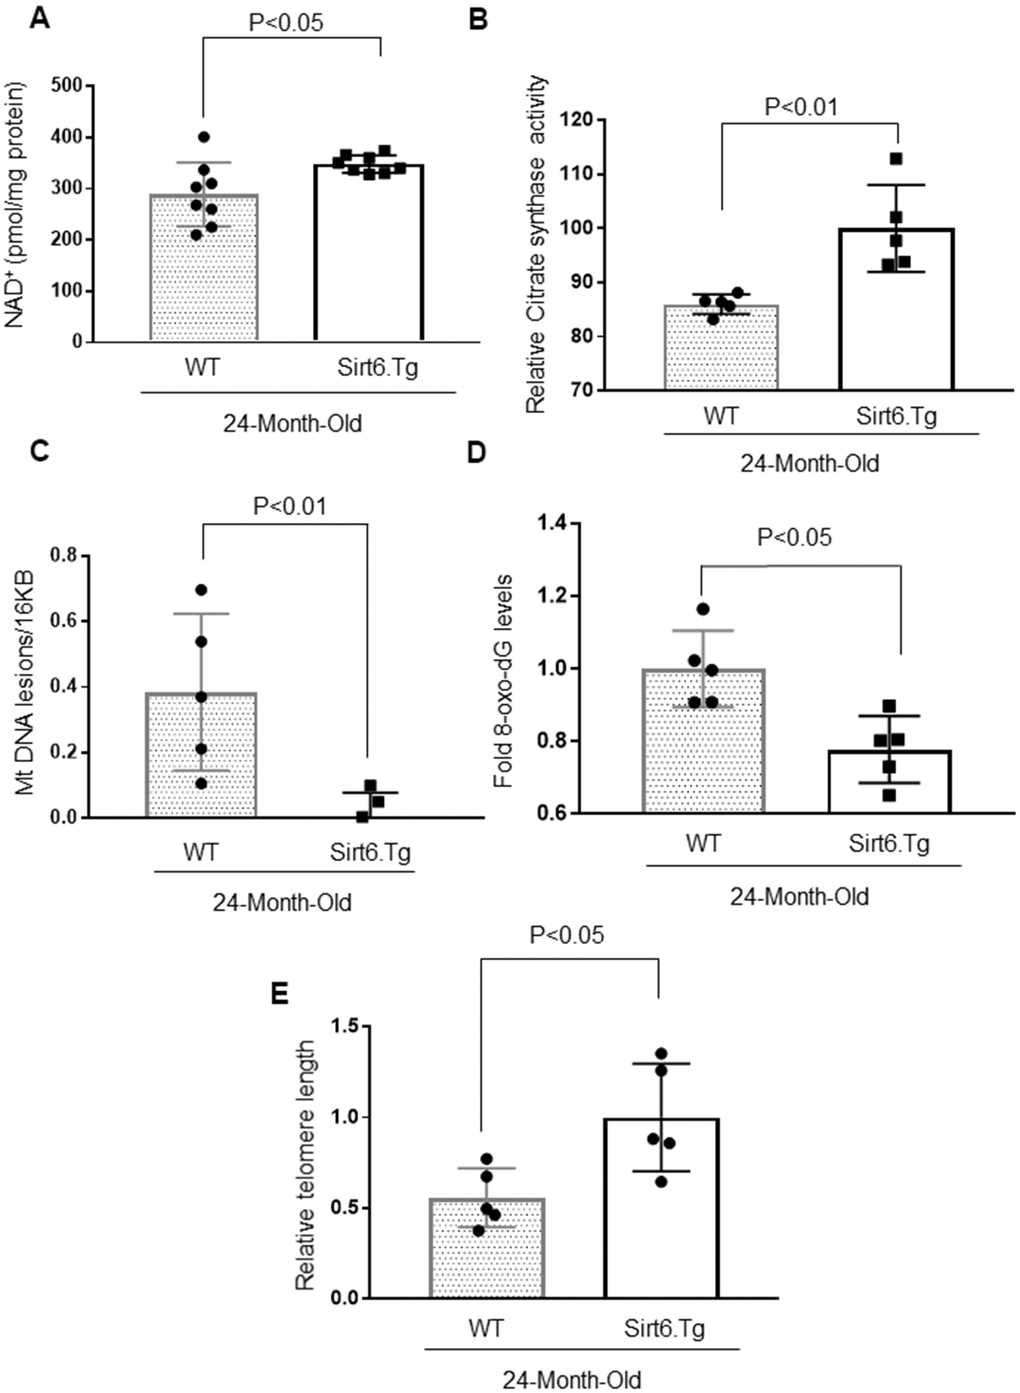 Sirt6.Tg mice display reduced cardiac aging phenotype. (A) Quantification of NAD+ contents in the heart lysate of 24-month-old WT and 24-month-old Sirt6 transgenic (Sirt6.Tg) mice. Values are mean ± SE, n = 8. (B) Relative Mitochondrial citrate synthase activity in the heart of Wild type and Sirt6.Tg mice. Values are mean ± SE, n = 5. (C) Relative mitochondrial lesions in the heart of Wild type and Sirt6.Tg mice. Values are mean ± SE, n = 5. (D) 8-Oxo-dG content in the DNA of the whole heart of Wild type and Sirt6.Tg mice. Values are mean ± SE, n = 5. (E) Relative telomere length of Wild type and Sirt6.Tg mice. Values are mean ± SE, n = 5.